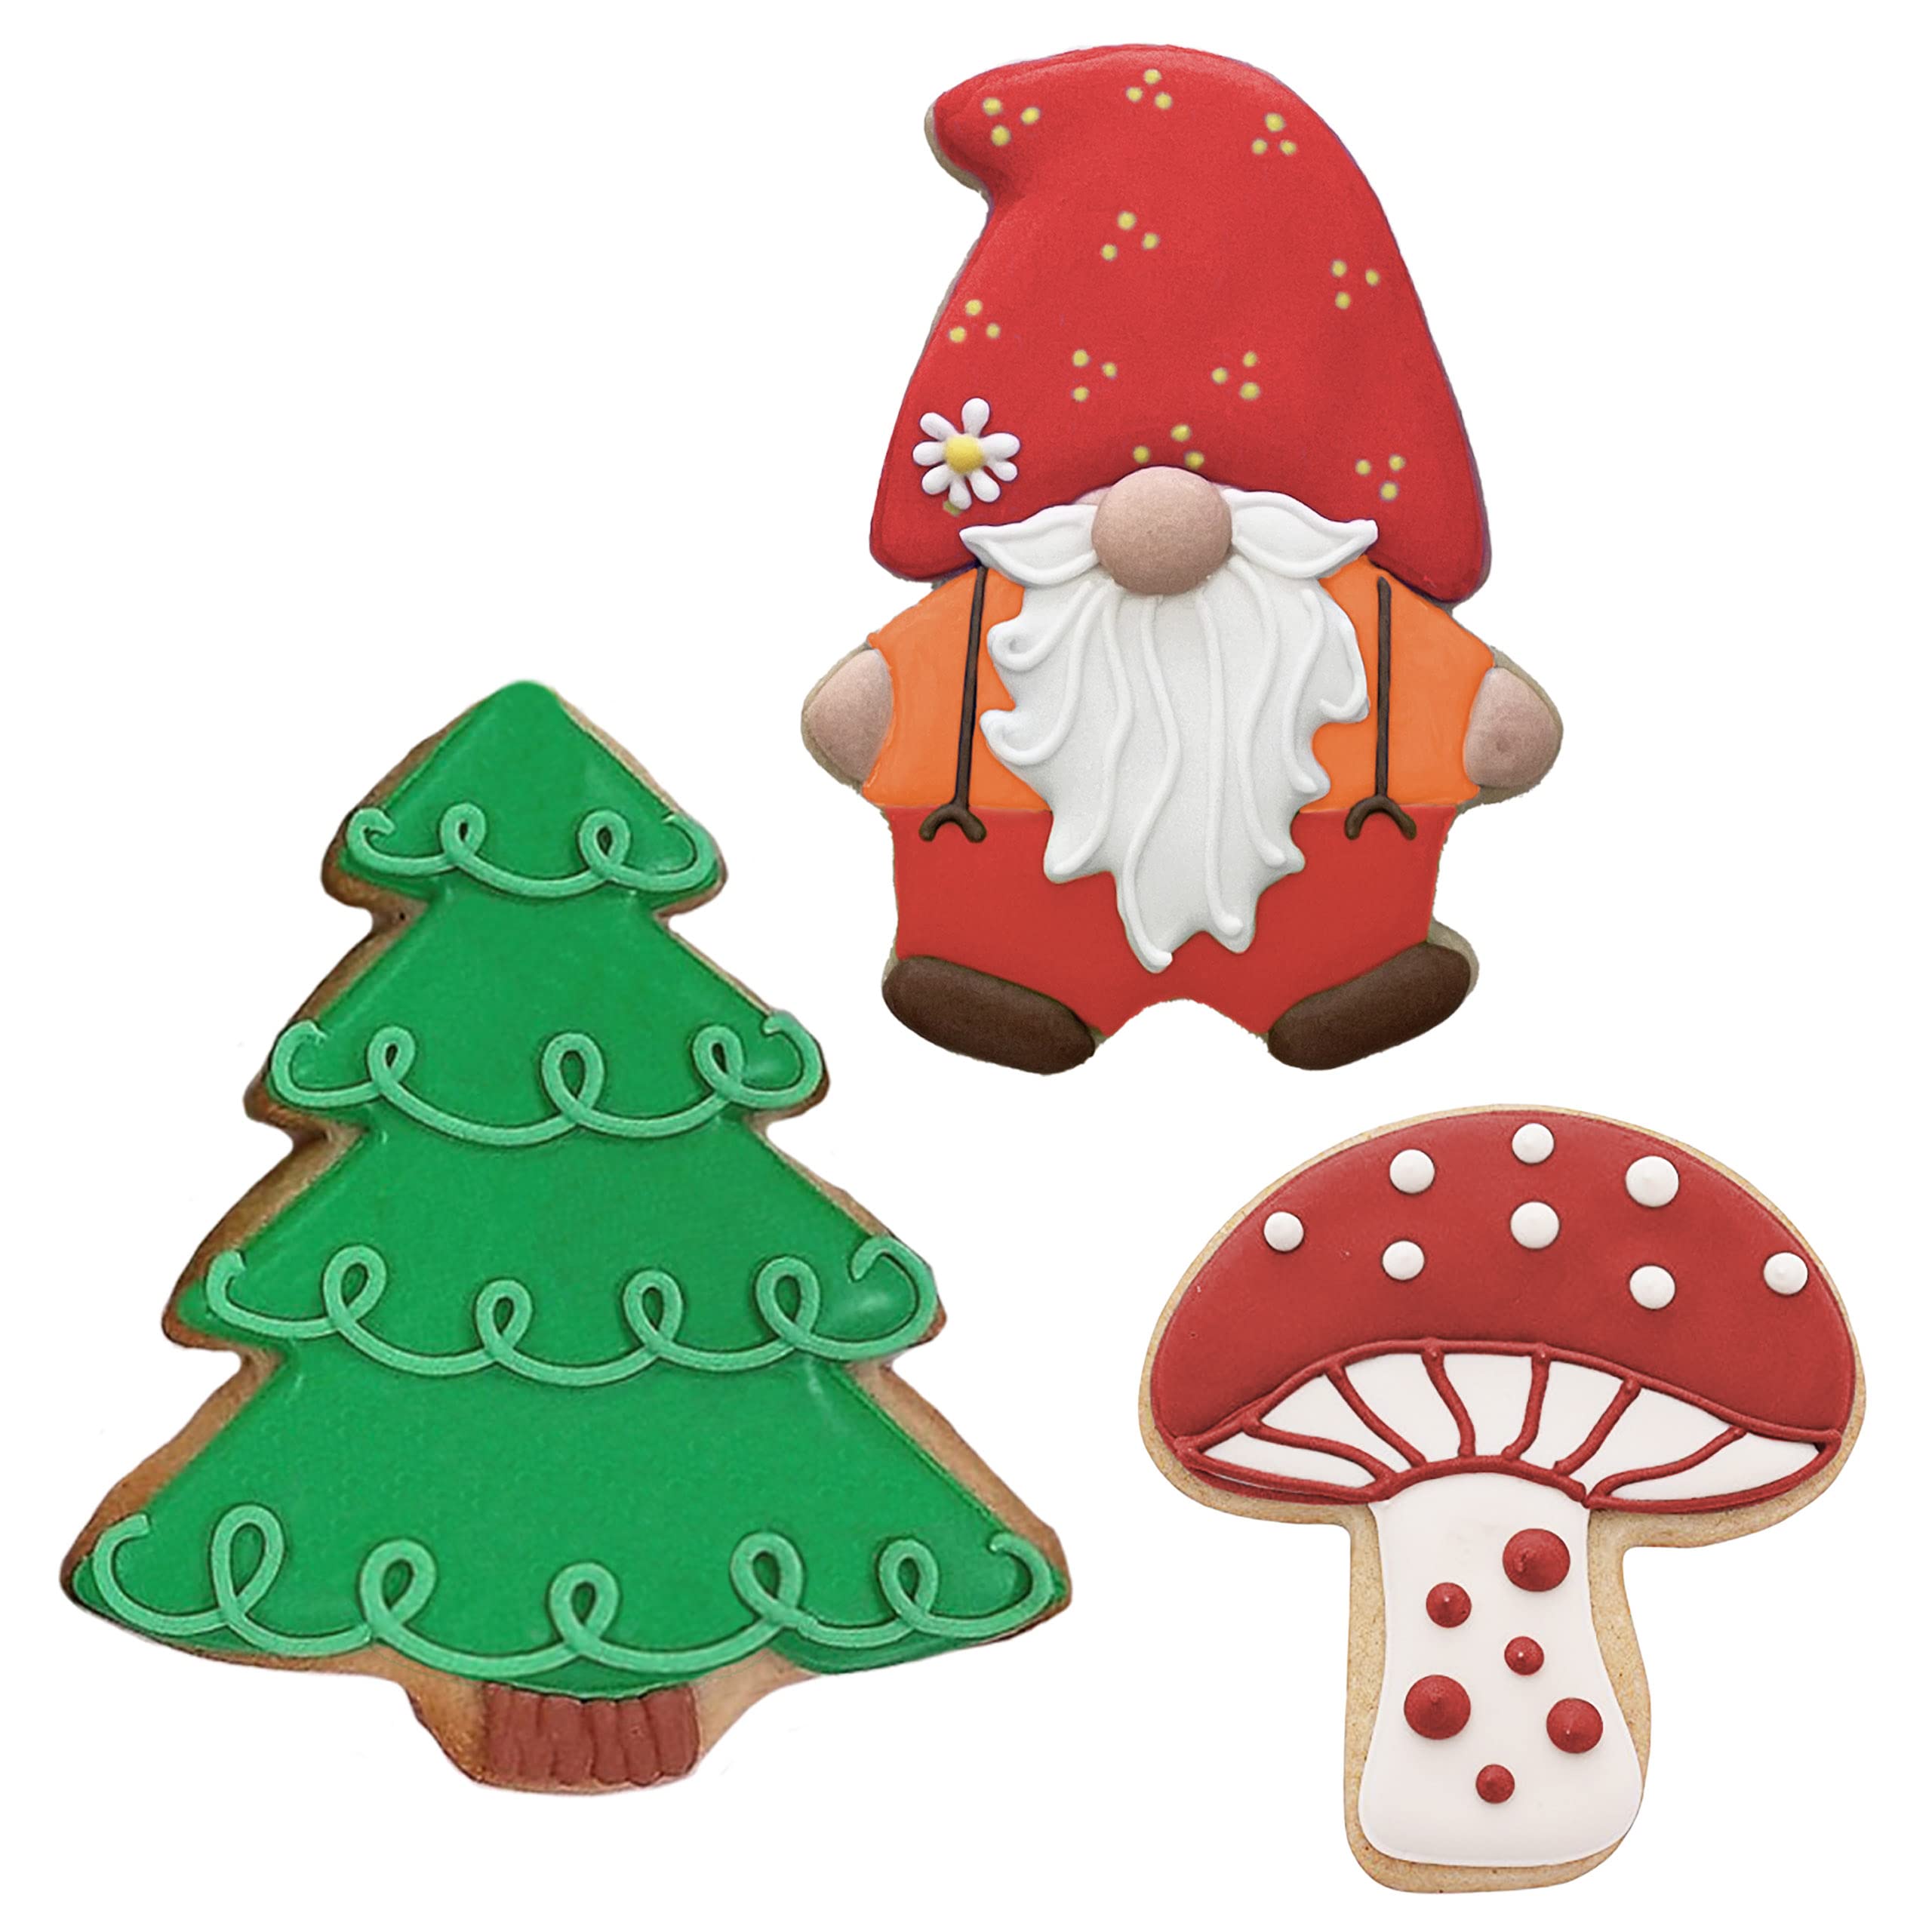 Gnome Enchanted Woodland 3-Pc. Set Made in USA by Ann Clark, Gnome, Mushroom, Tree